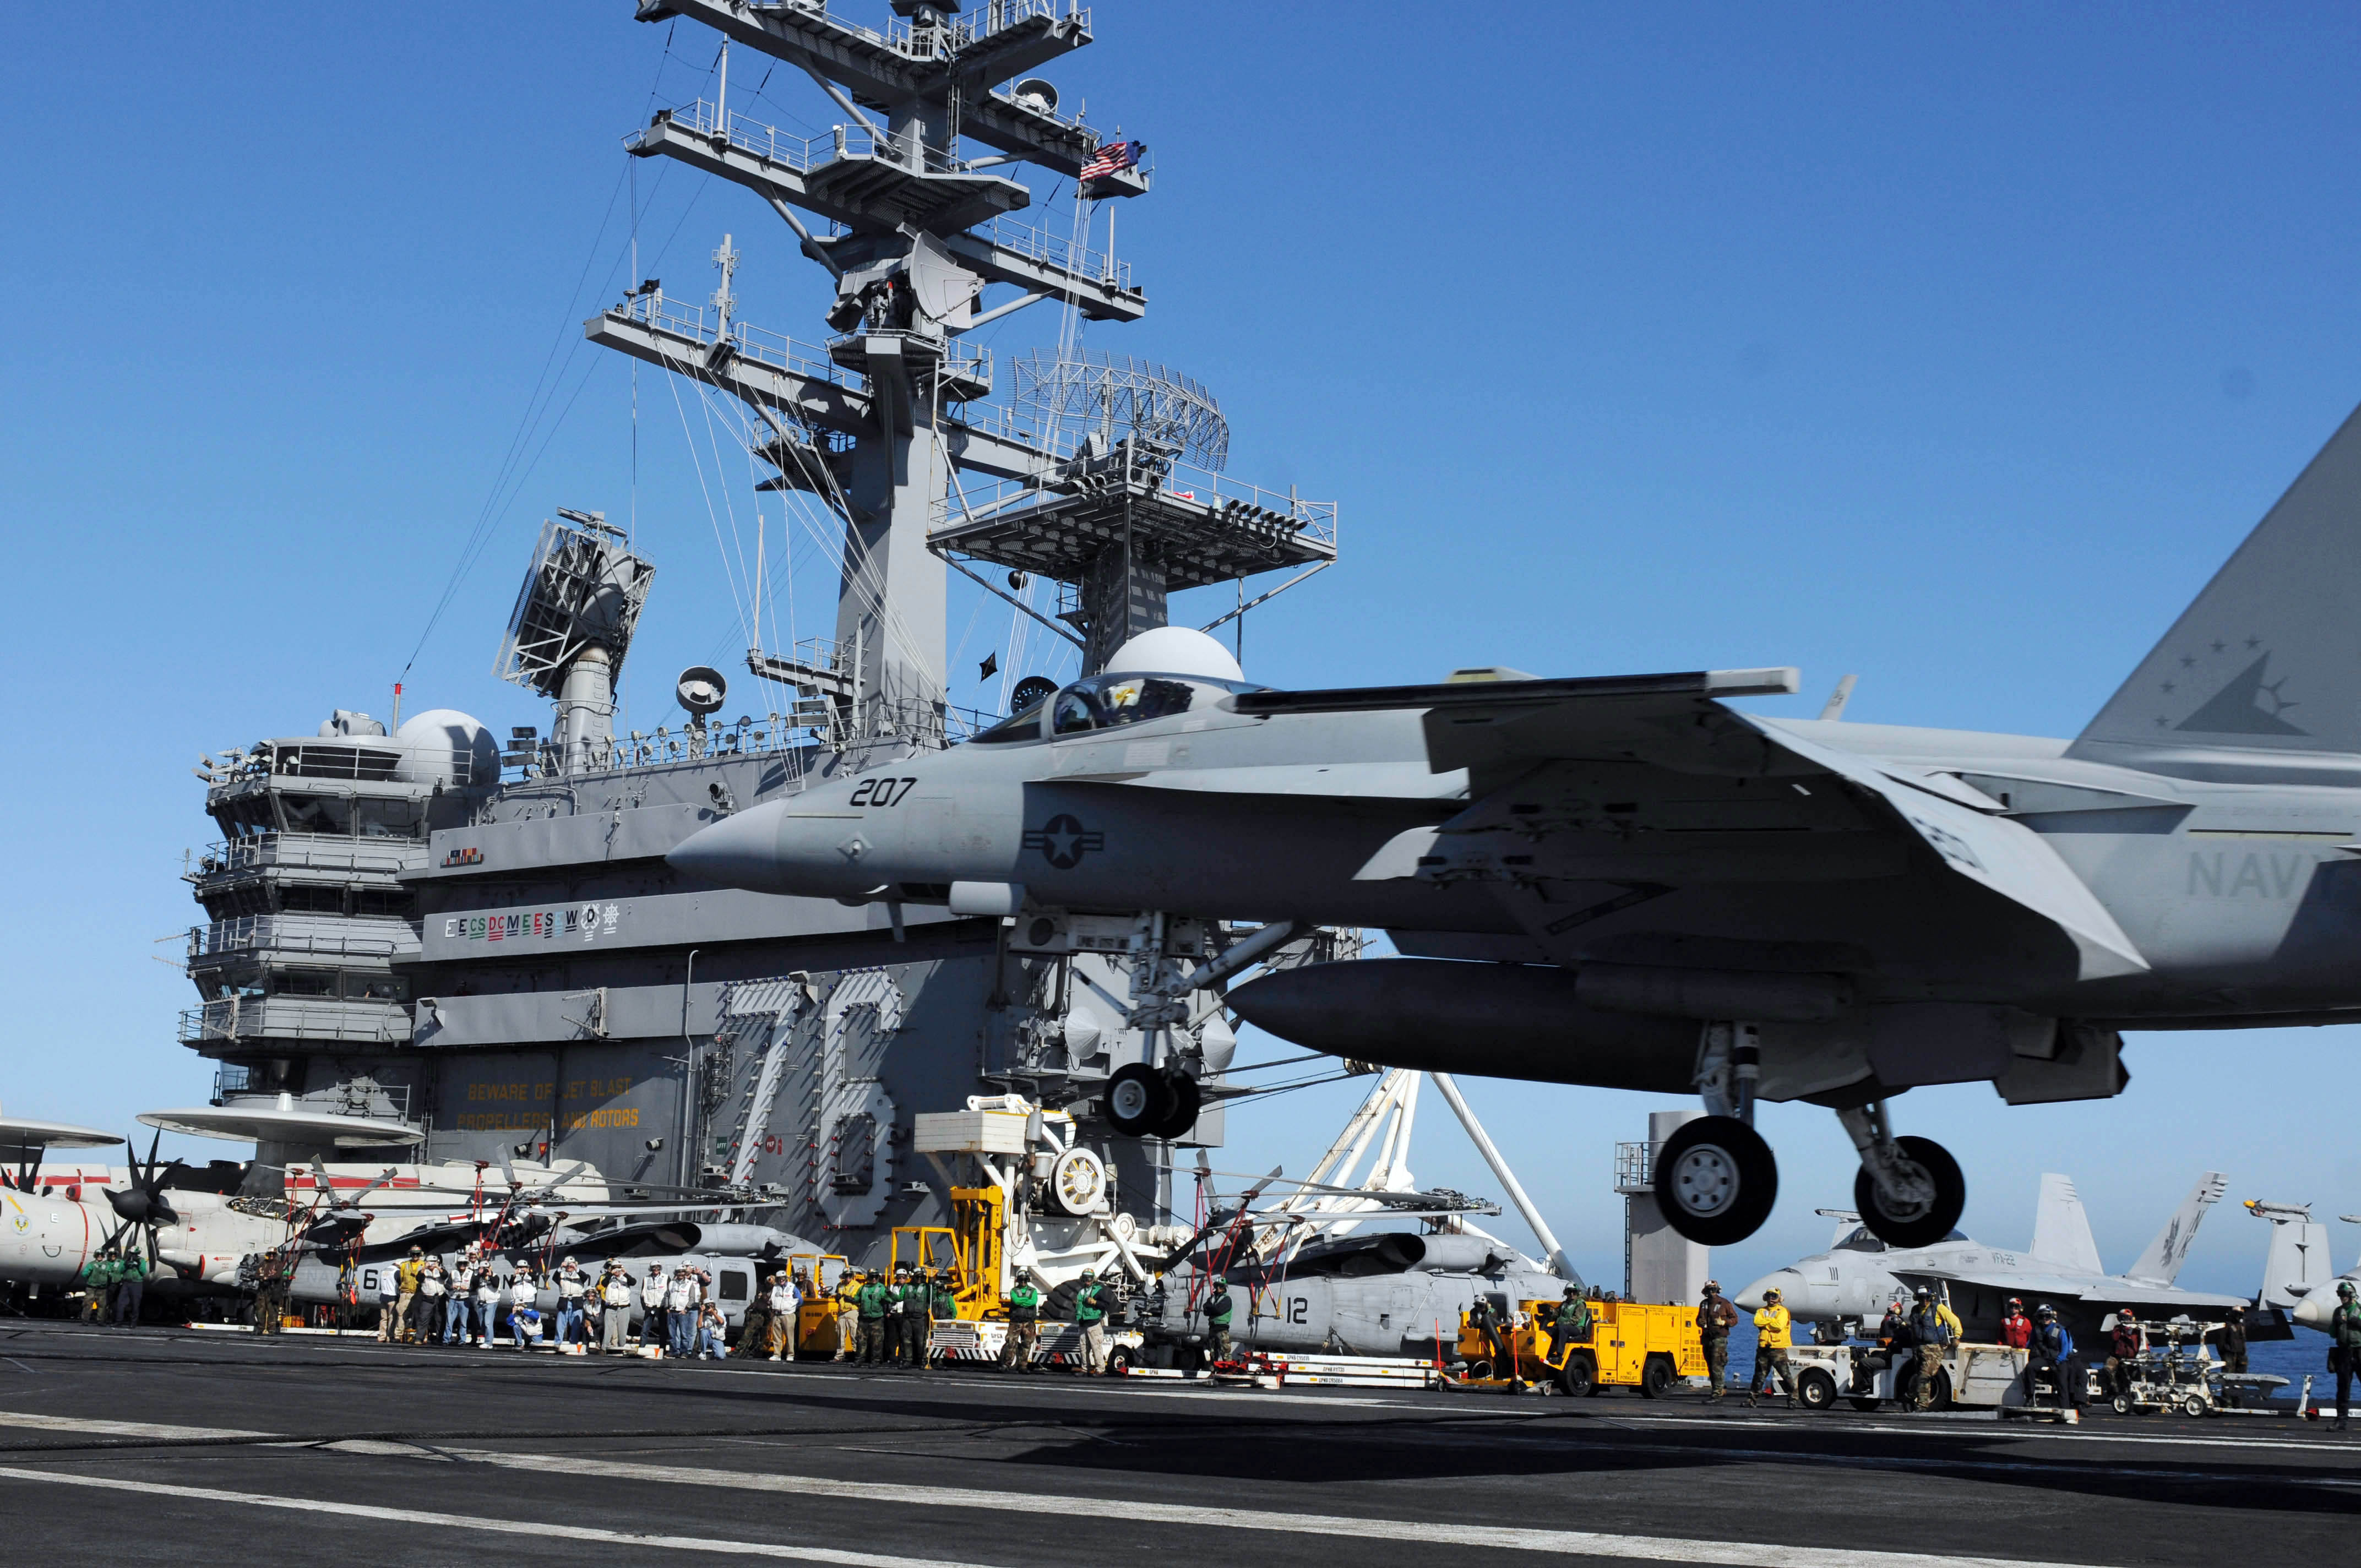 Landing On Aircraft Carrier Pc Android iPhone And iPad Wallpaper